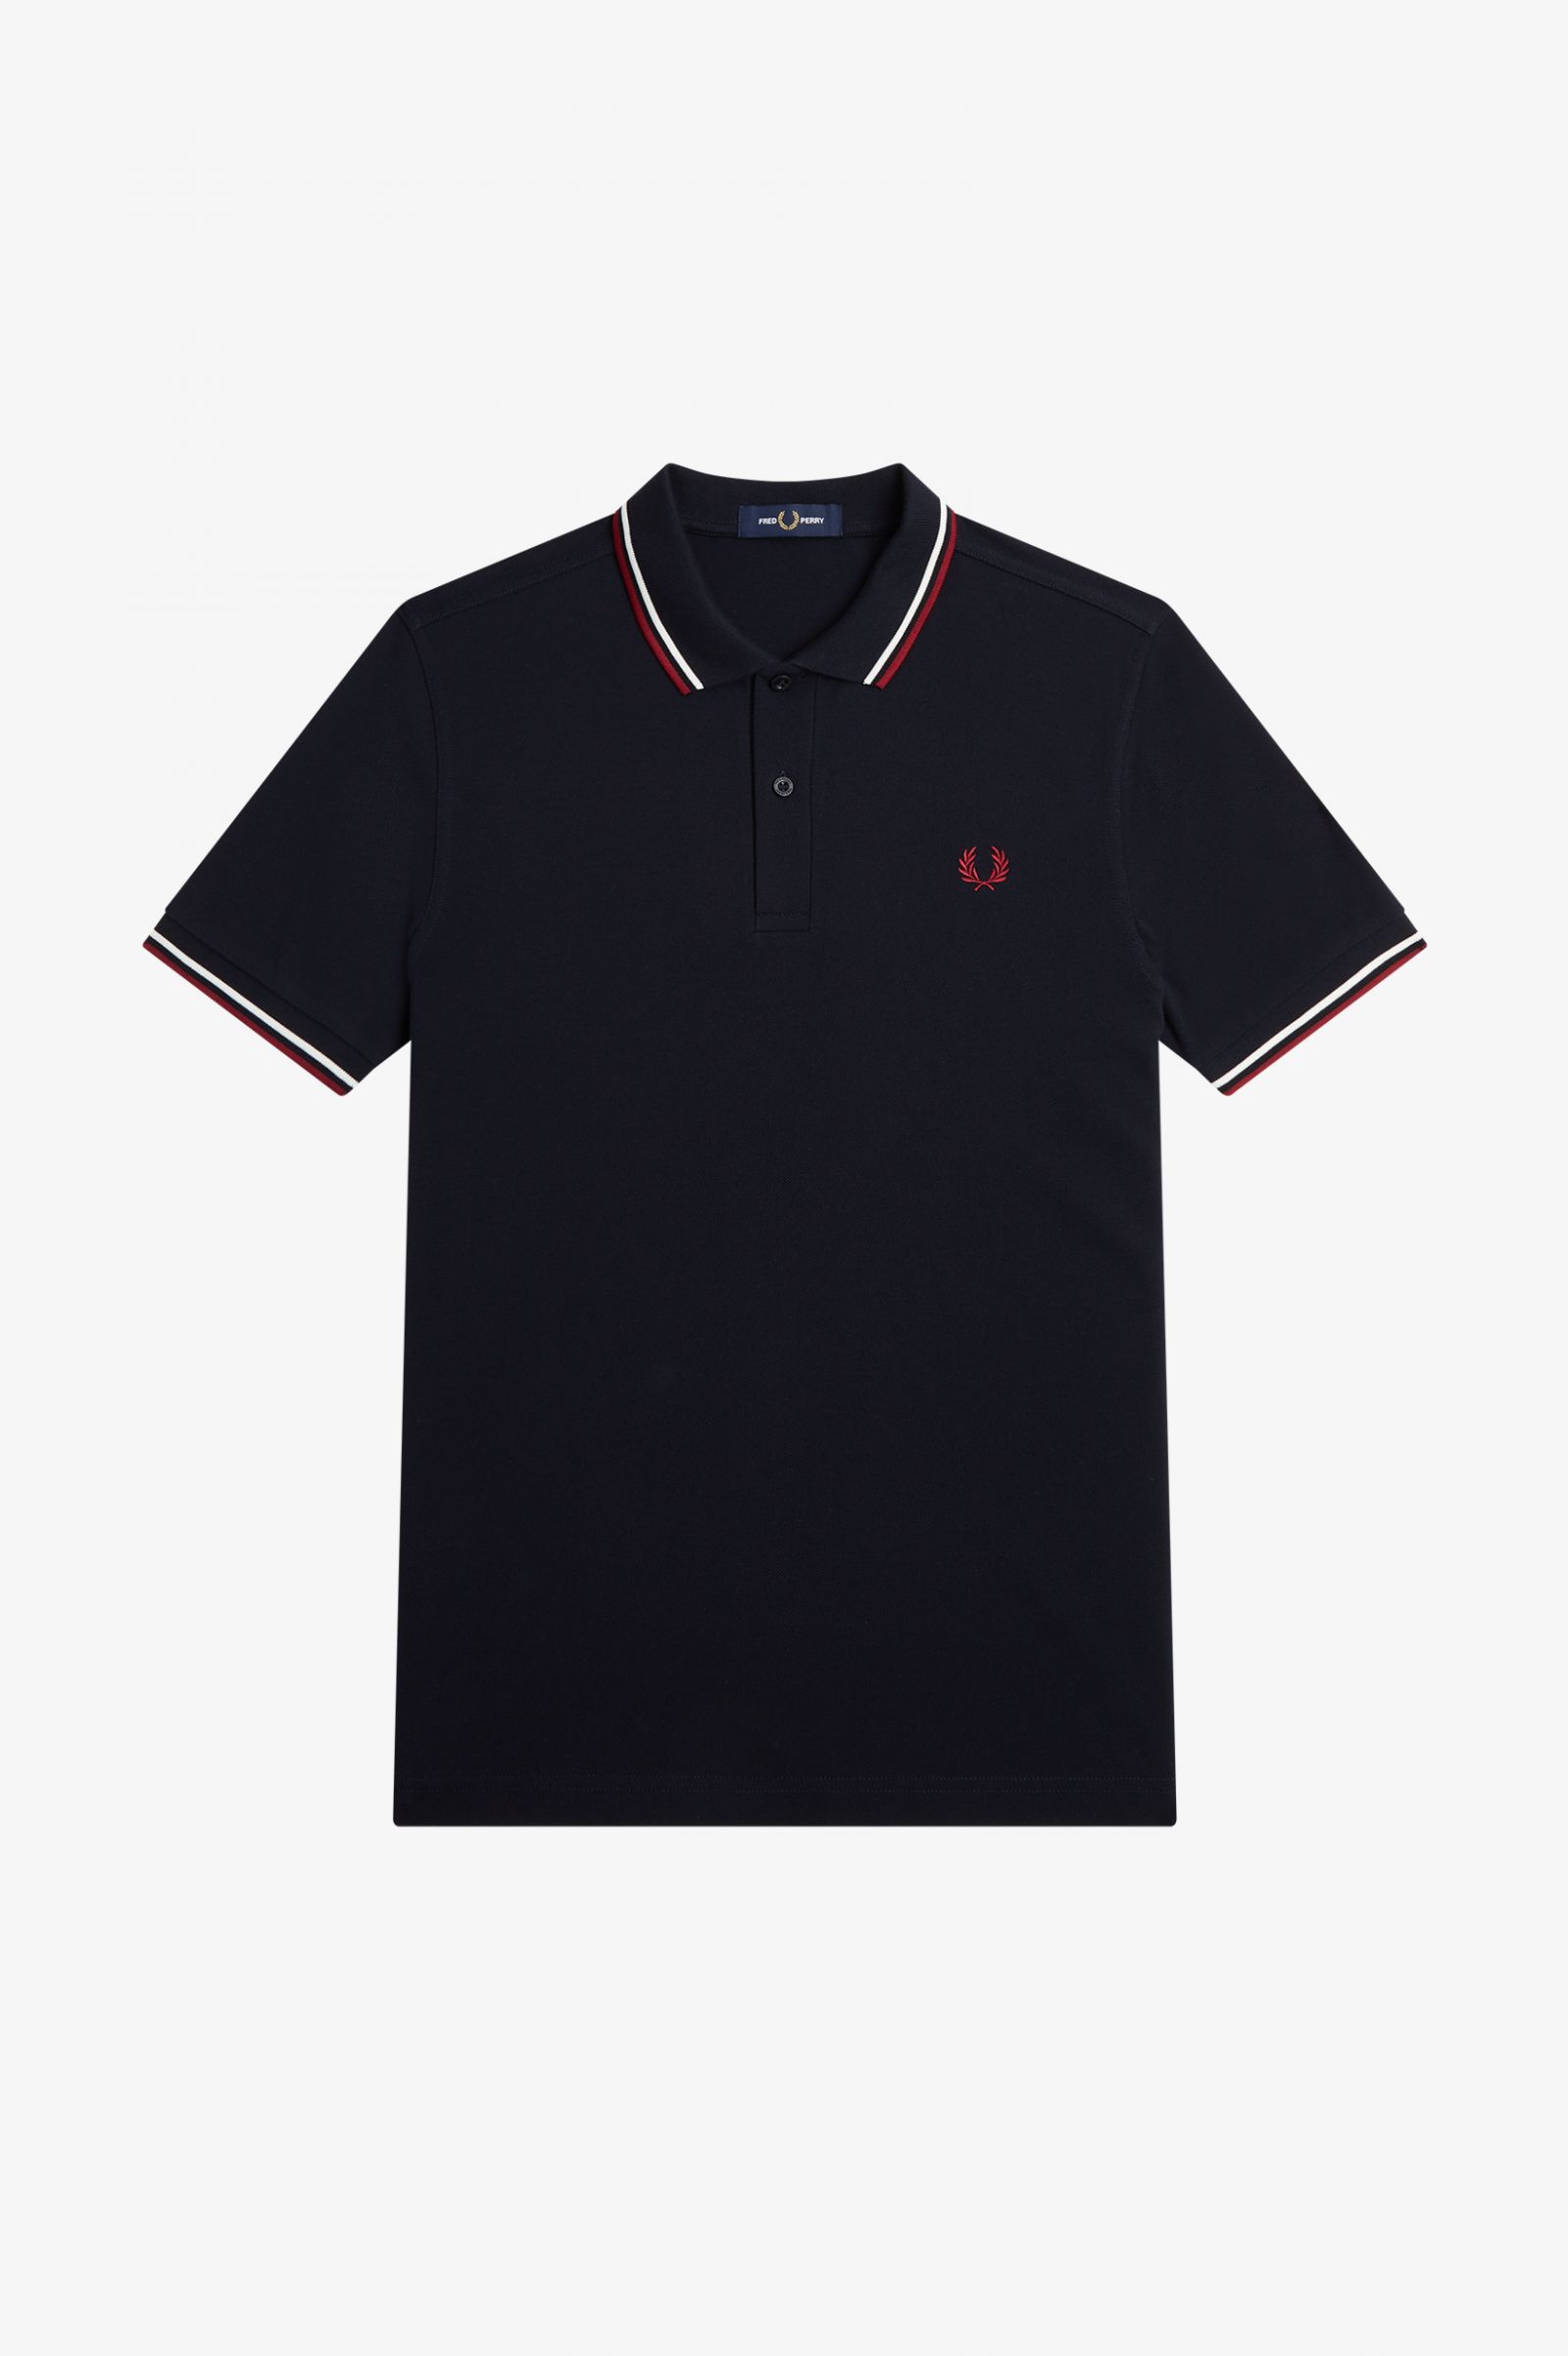 Fred Perry M3600 Twin Tipped Shirt in Navy/Snowwhite/Red